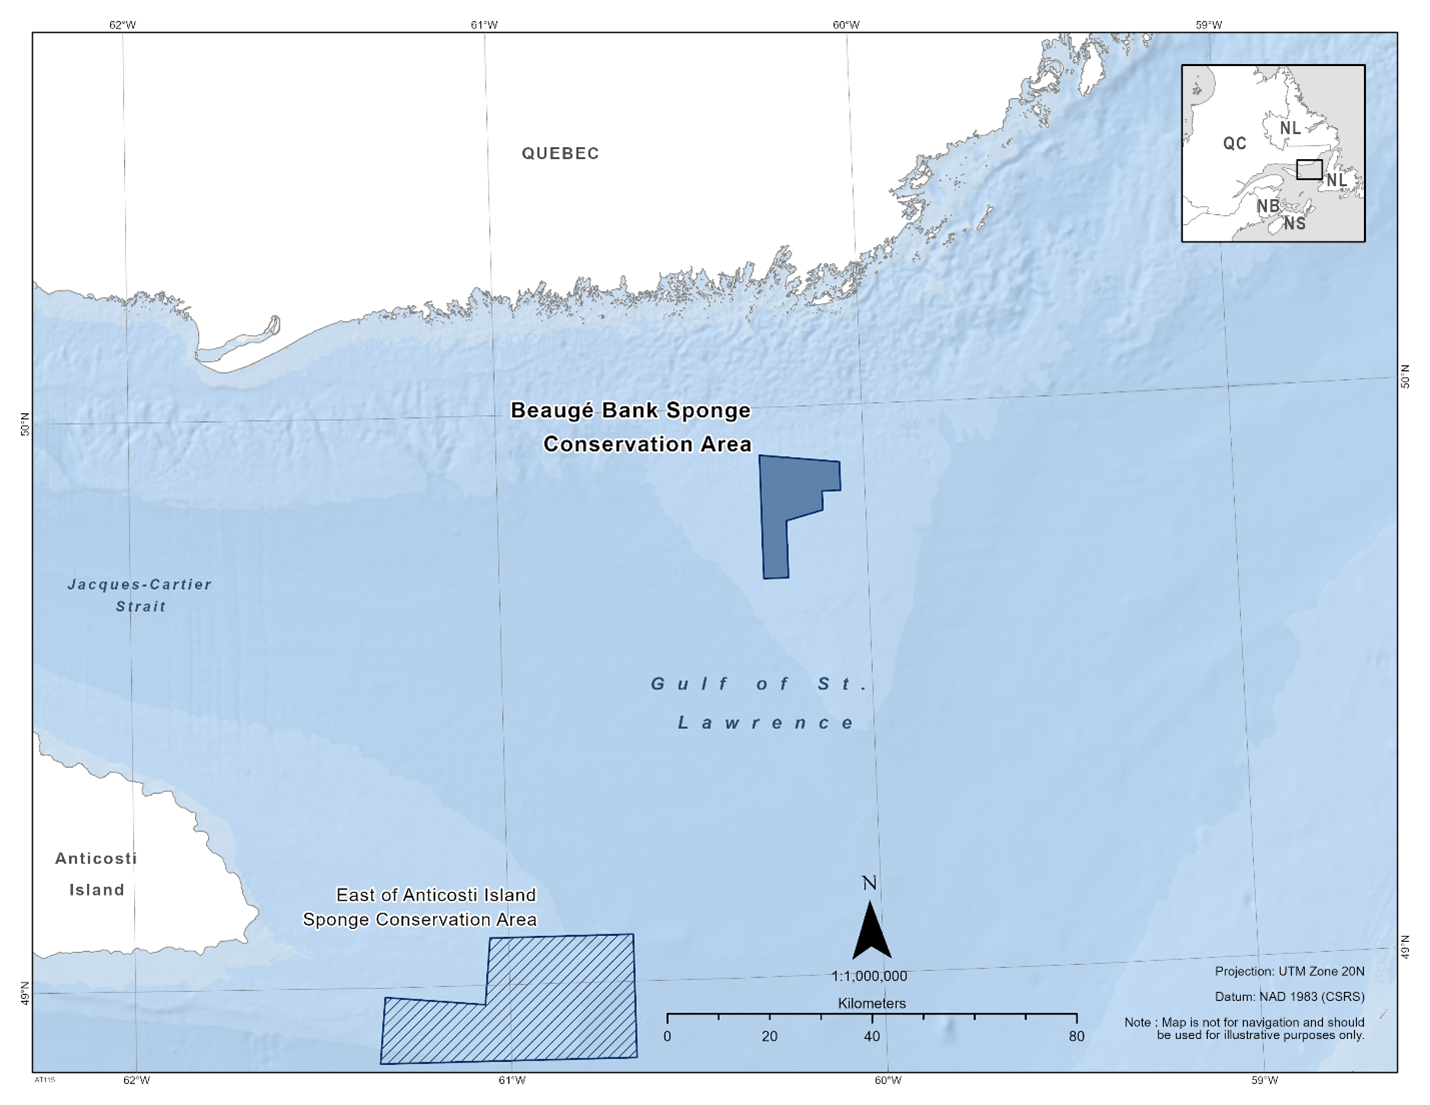 Map of the Beaugé Bank Sponge Conservation Area depicted in dark blue. The map also includes other marine refuges in the area with dark blue diagonal lines (East of Anticosti Island Sponge Conservation Area).